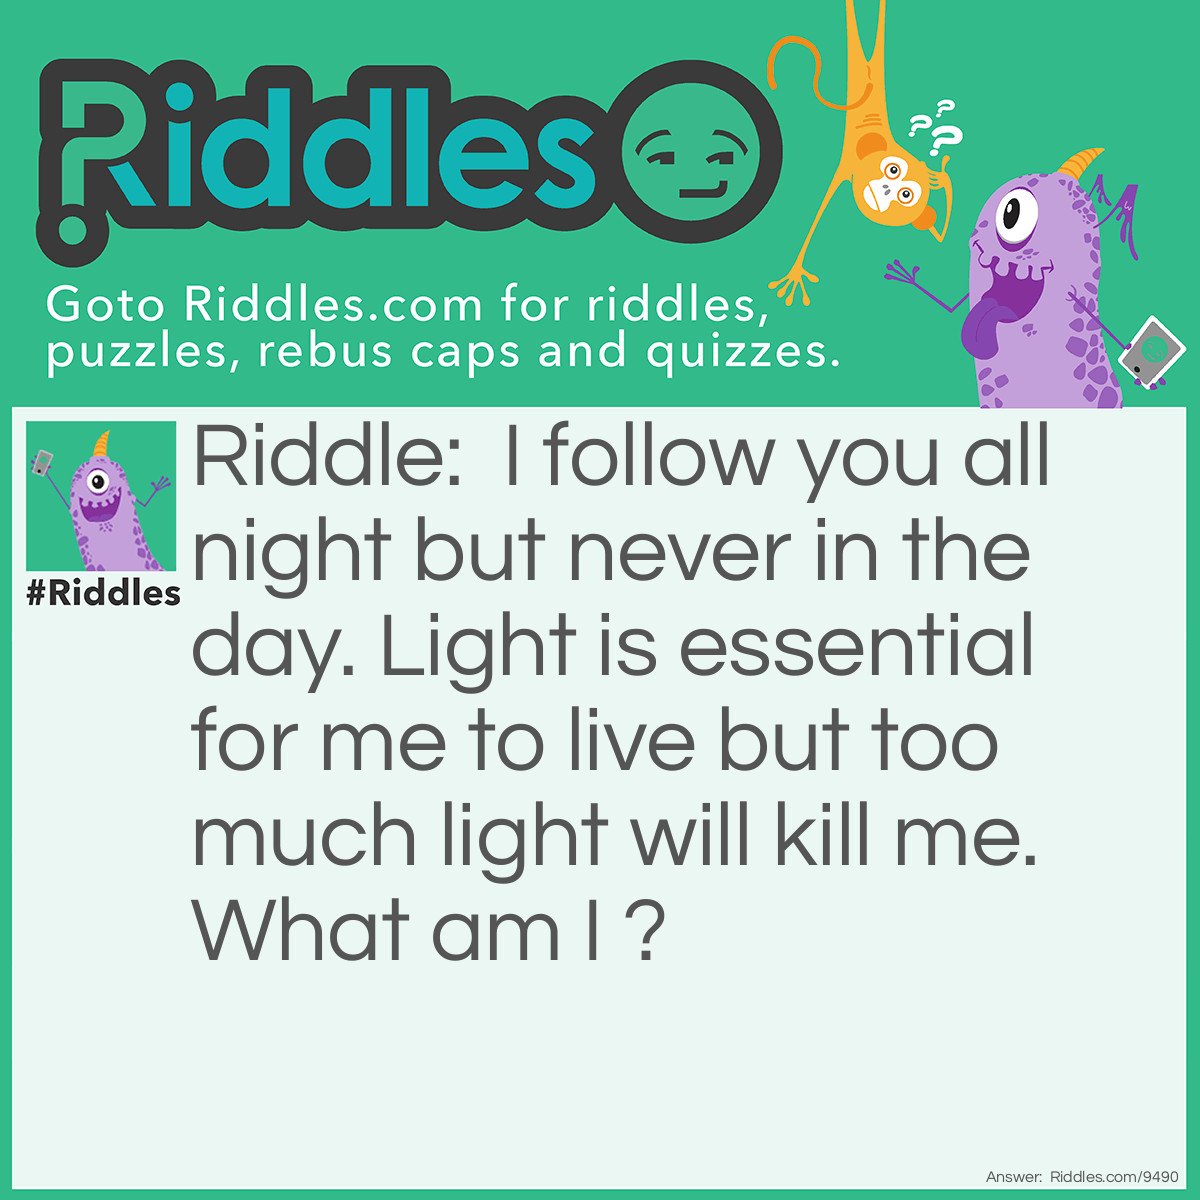 Riddle: I follow you all night but never in the day. Light is essential for me to live but too much light will kill me. What am I ? Answer: Your shadow